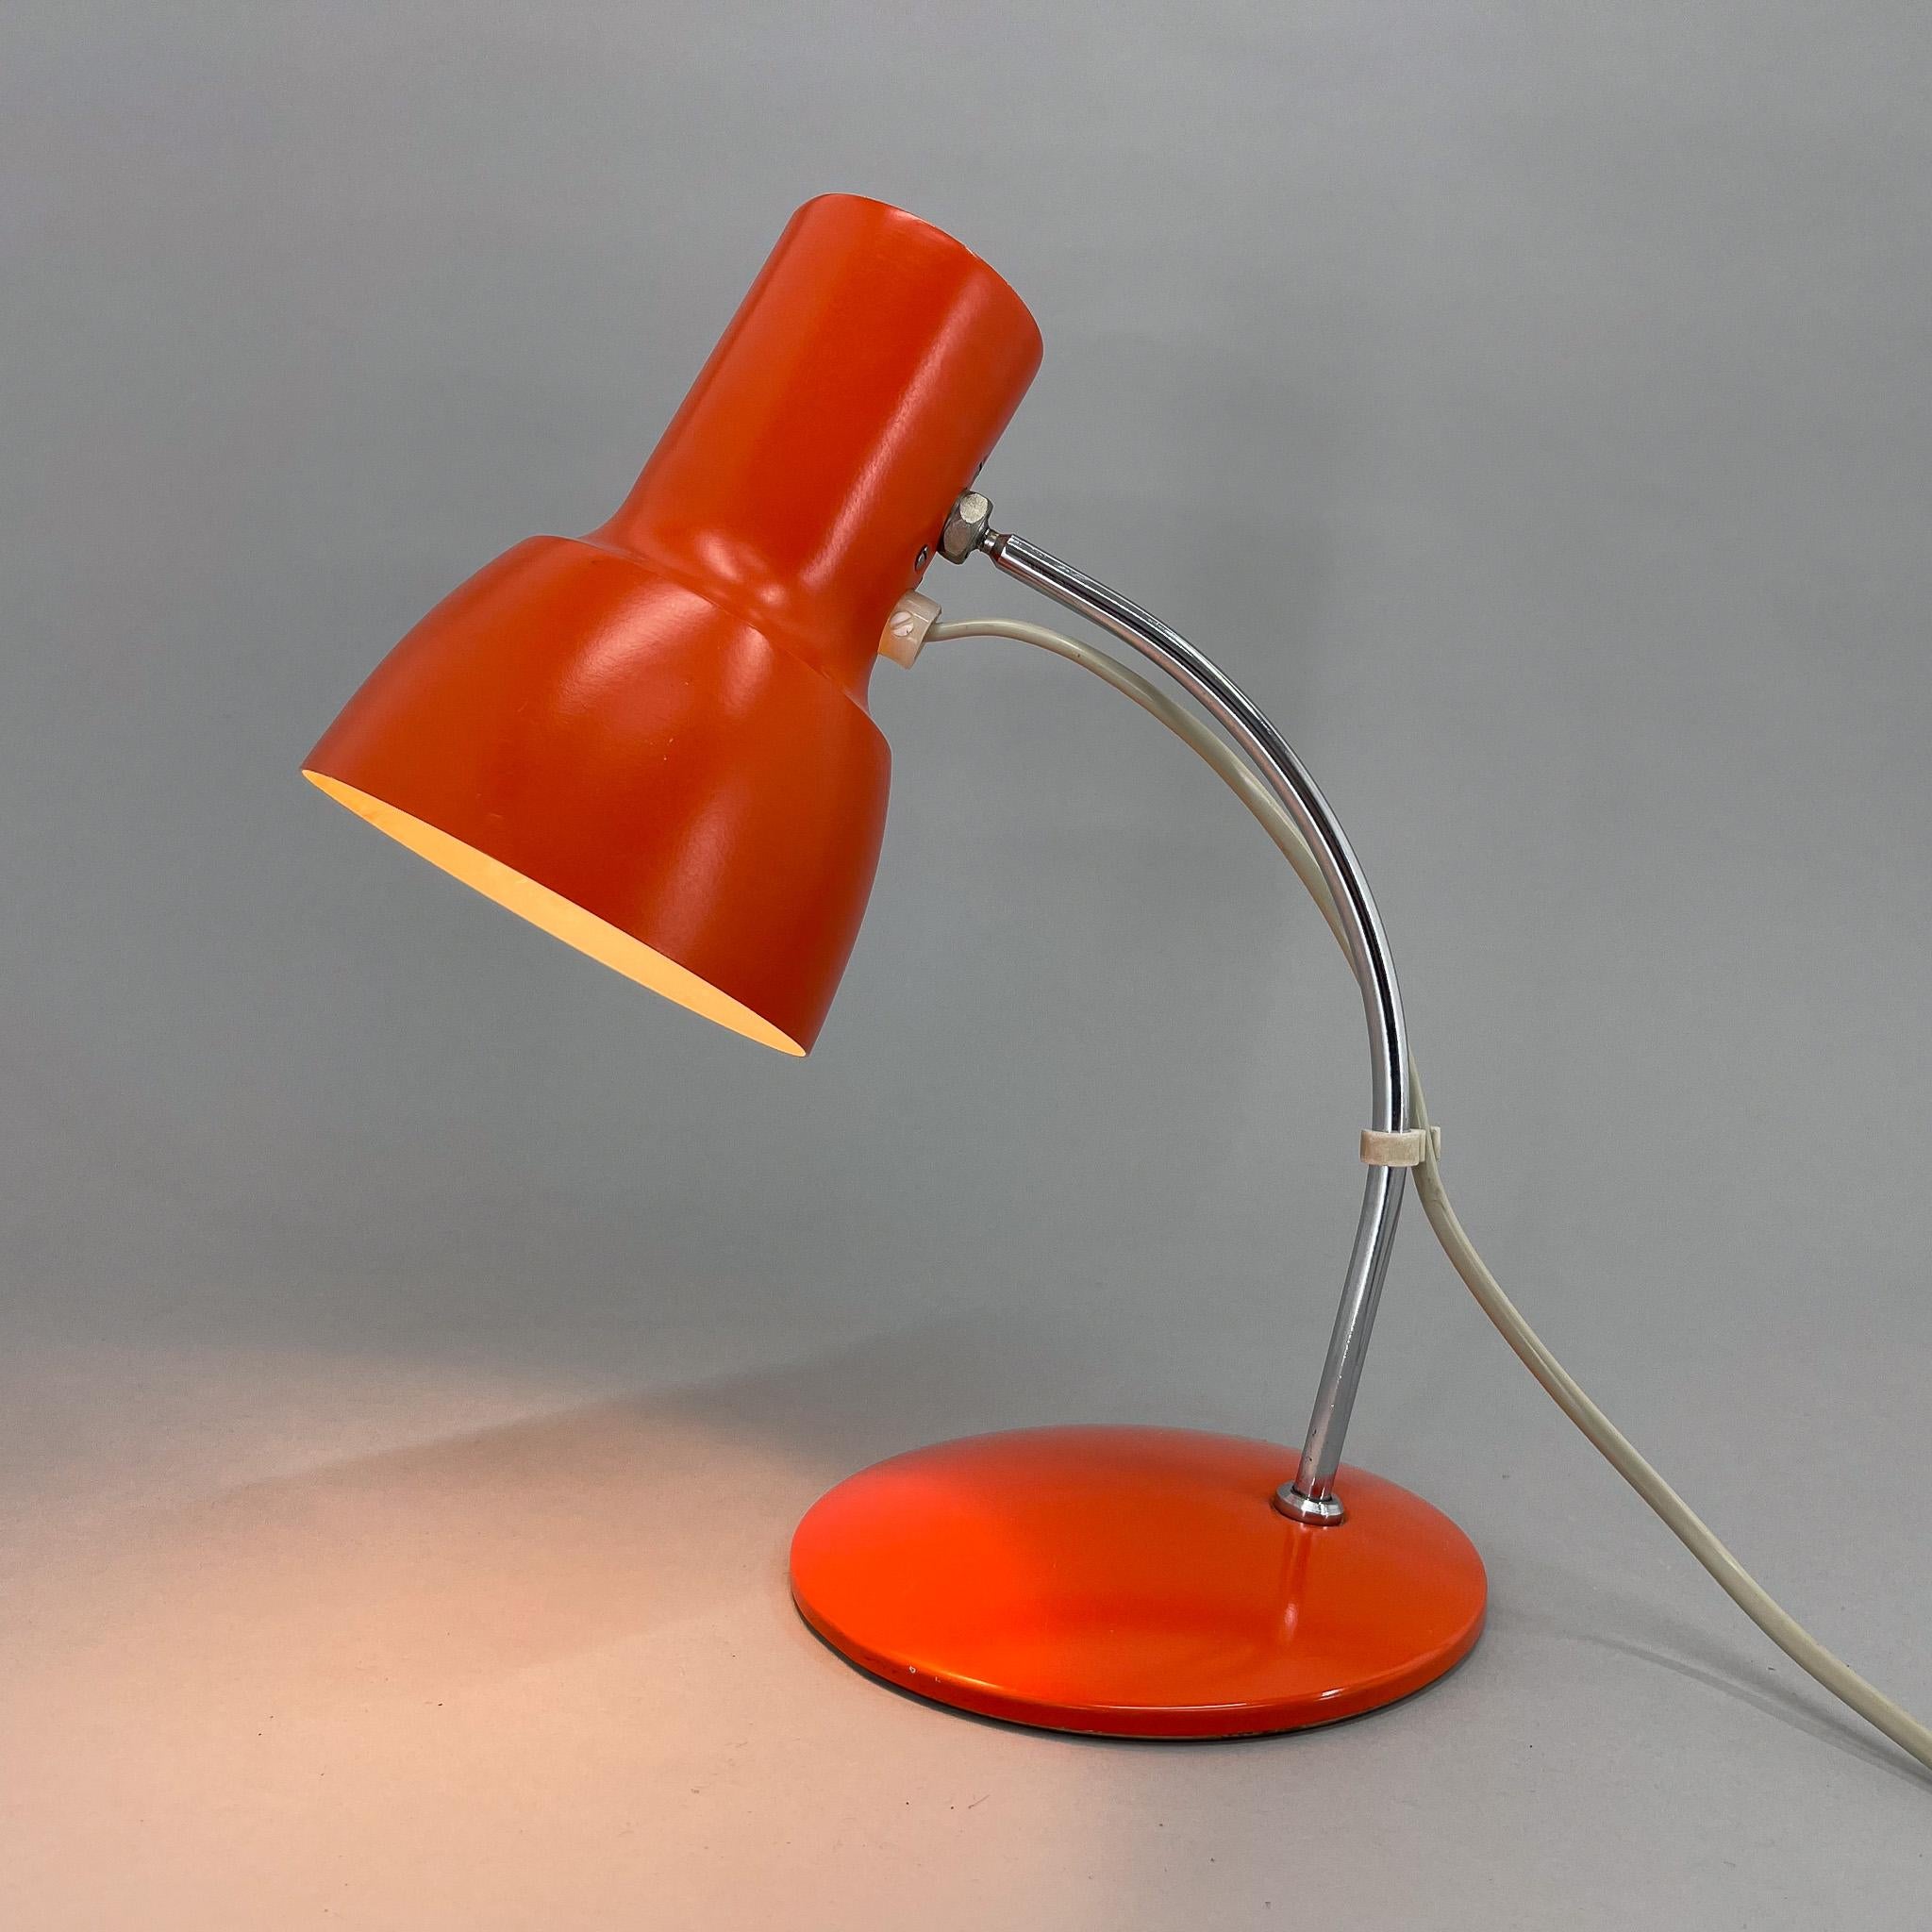 Vintage orange metal and chrome table lamp with adjustable lamp shade. Produced in former Czechoslovakia in the 1970's. 
Bulb: 1x E14. US plug adapter included.